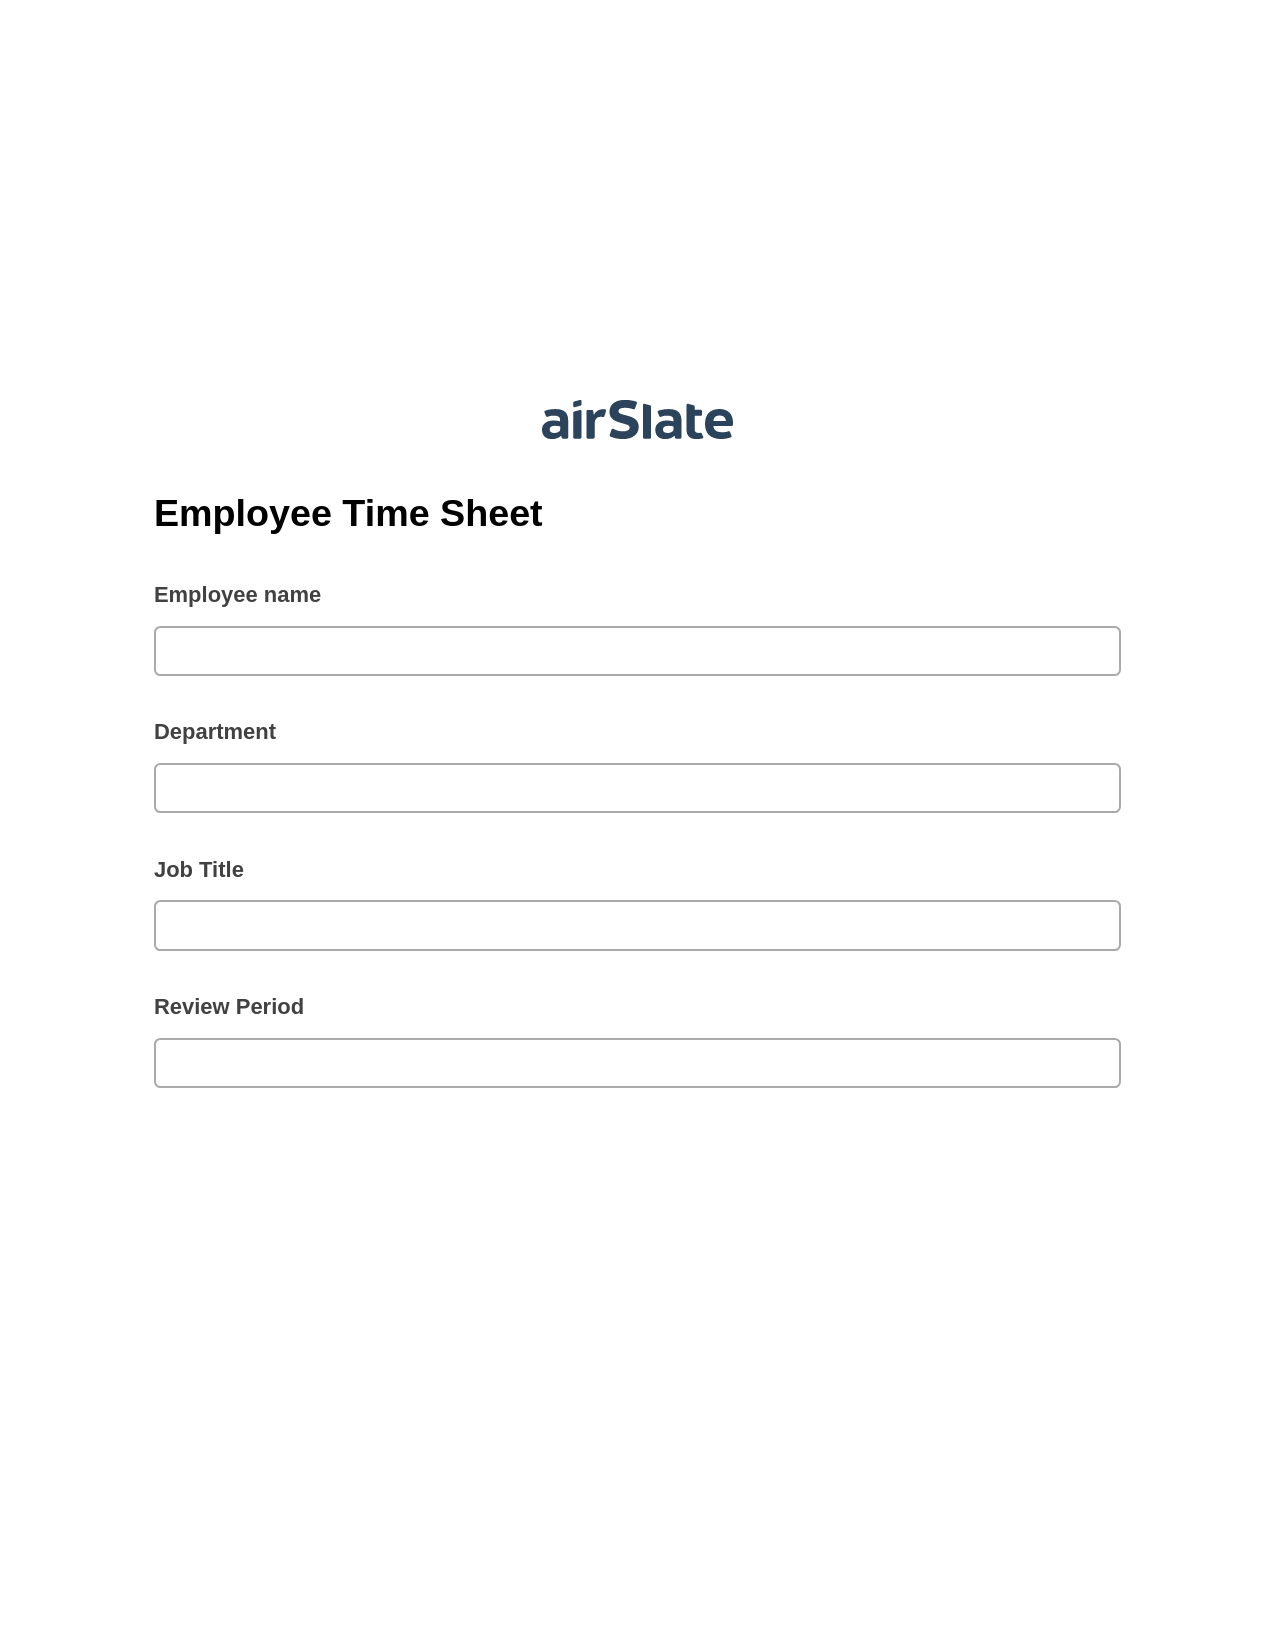 Employee Time Sheet Pre-fill from MS Dynamics 365 Records, Update Audit Trail Bot, Archive to Google Drive Bot